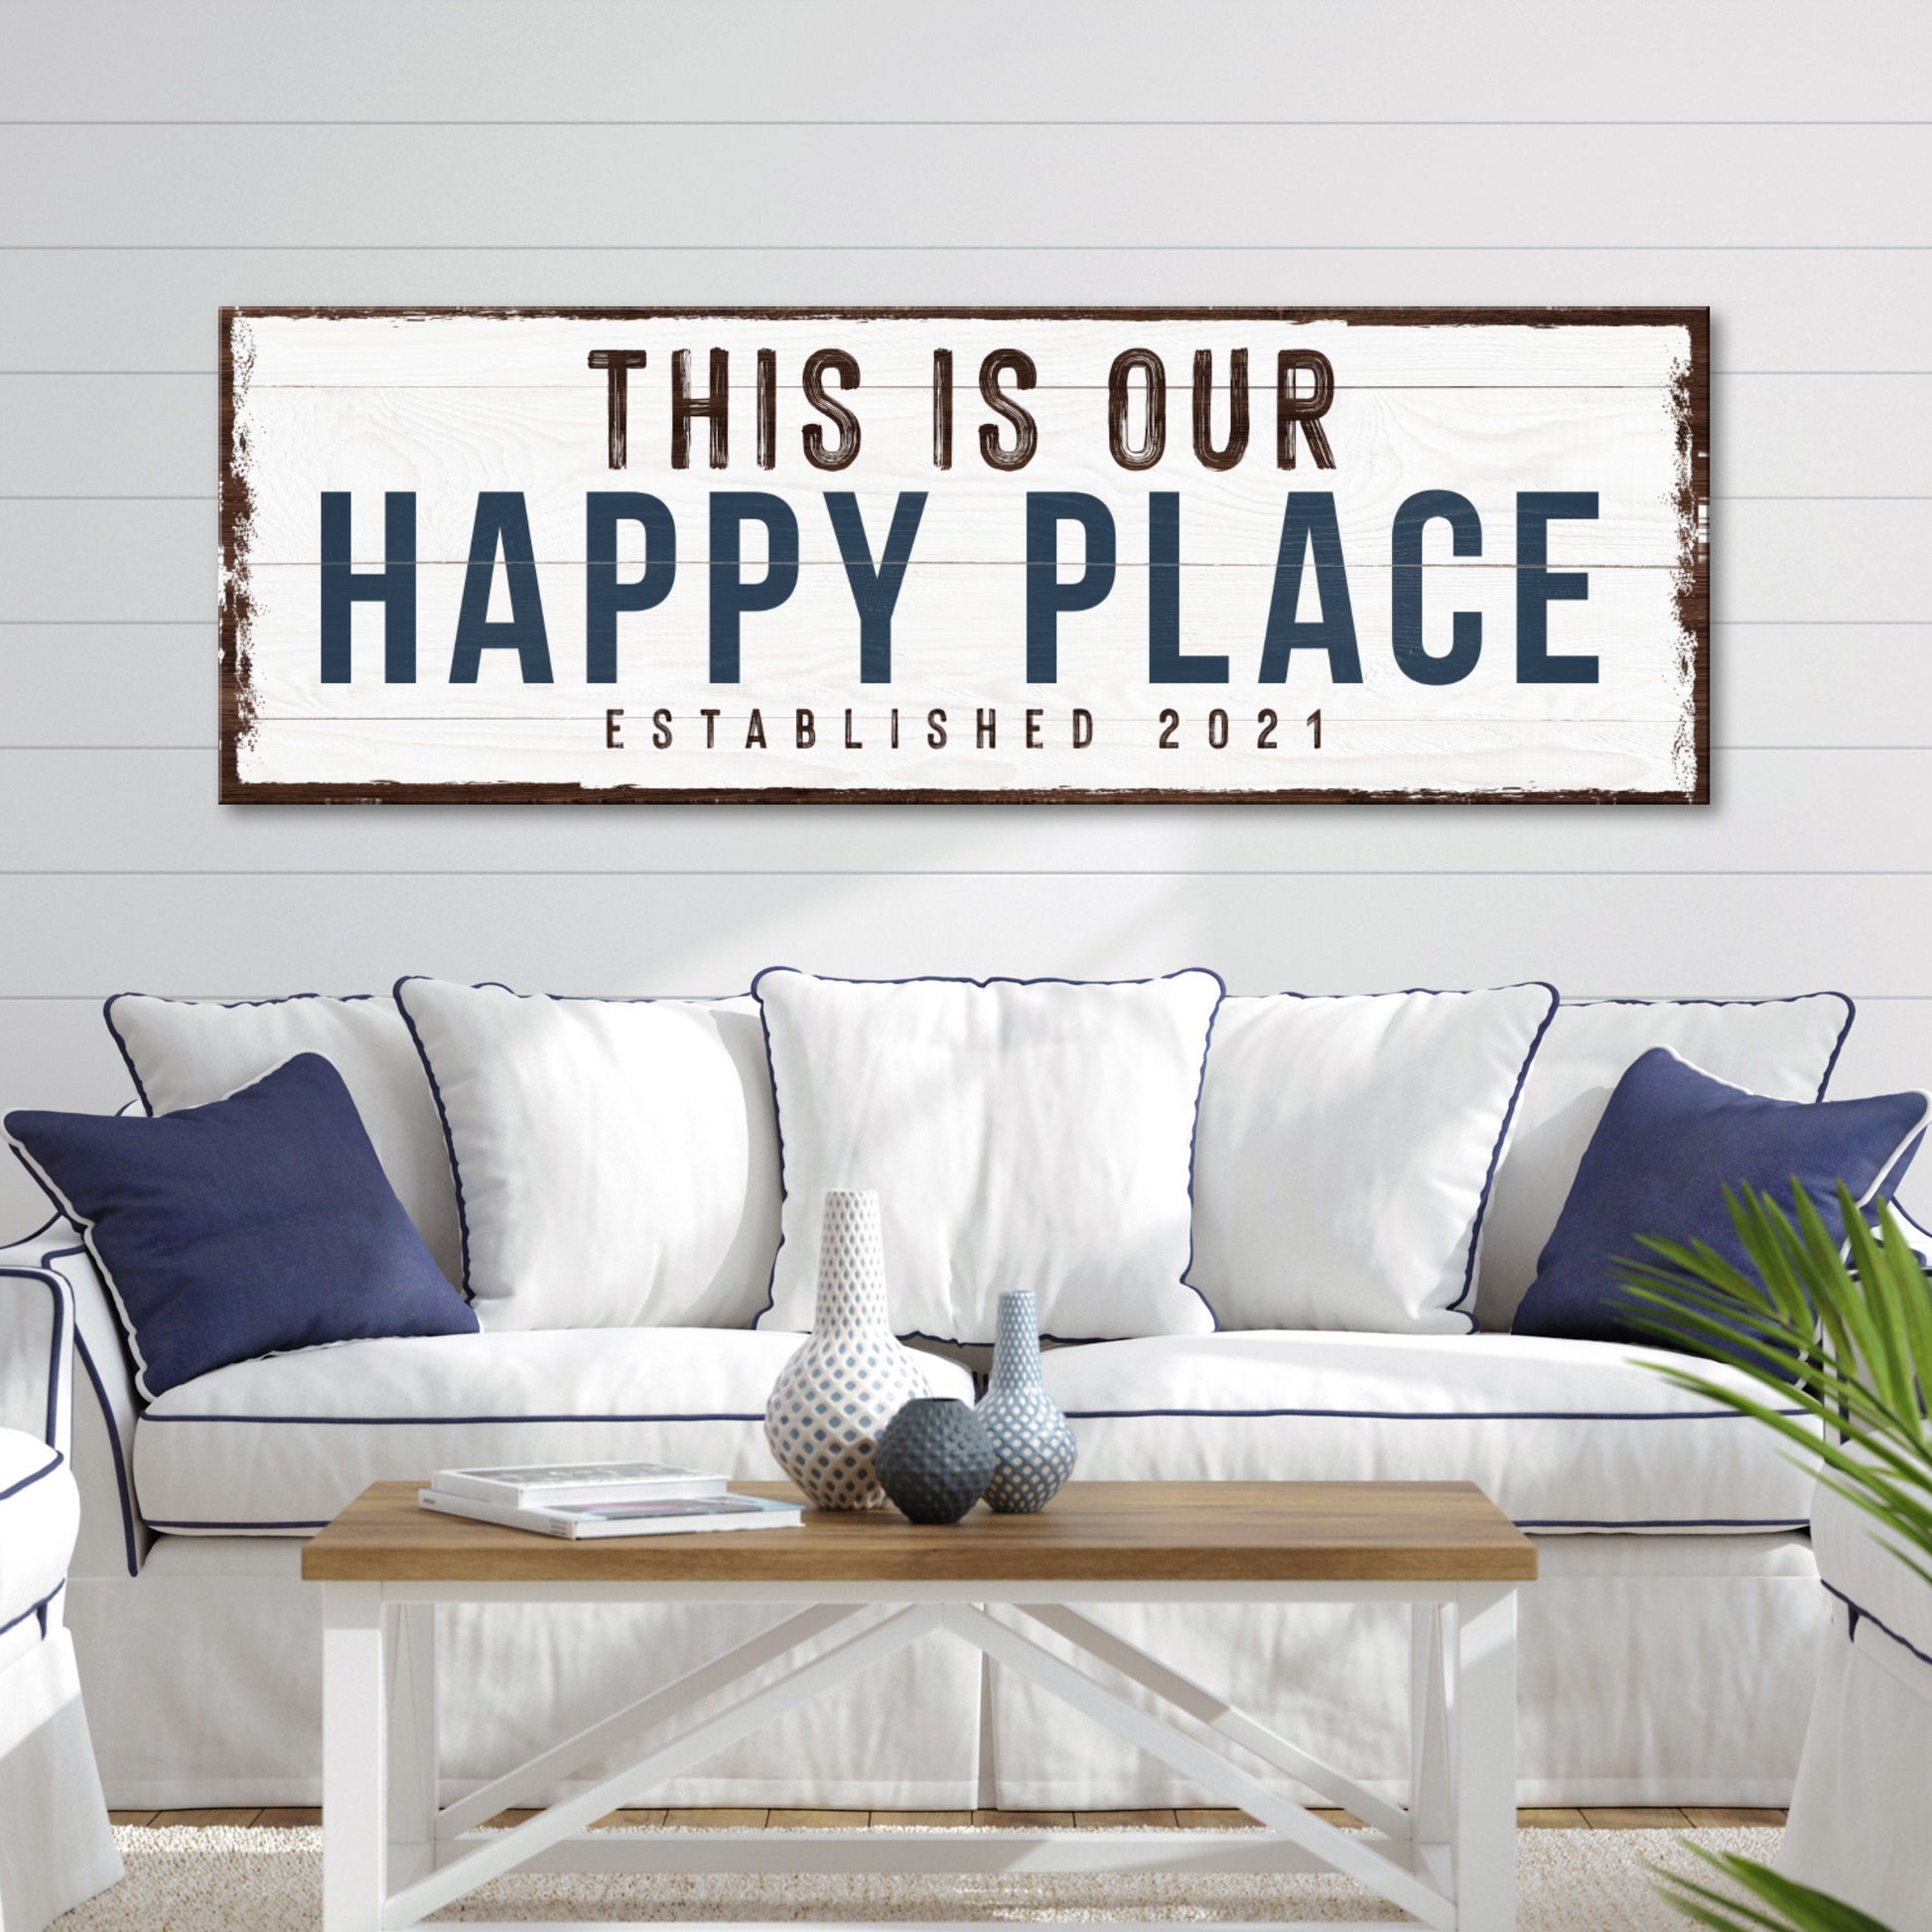 This is Our Happy Place Sign Established 2021 - Image by Tailored Canvases